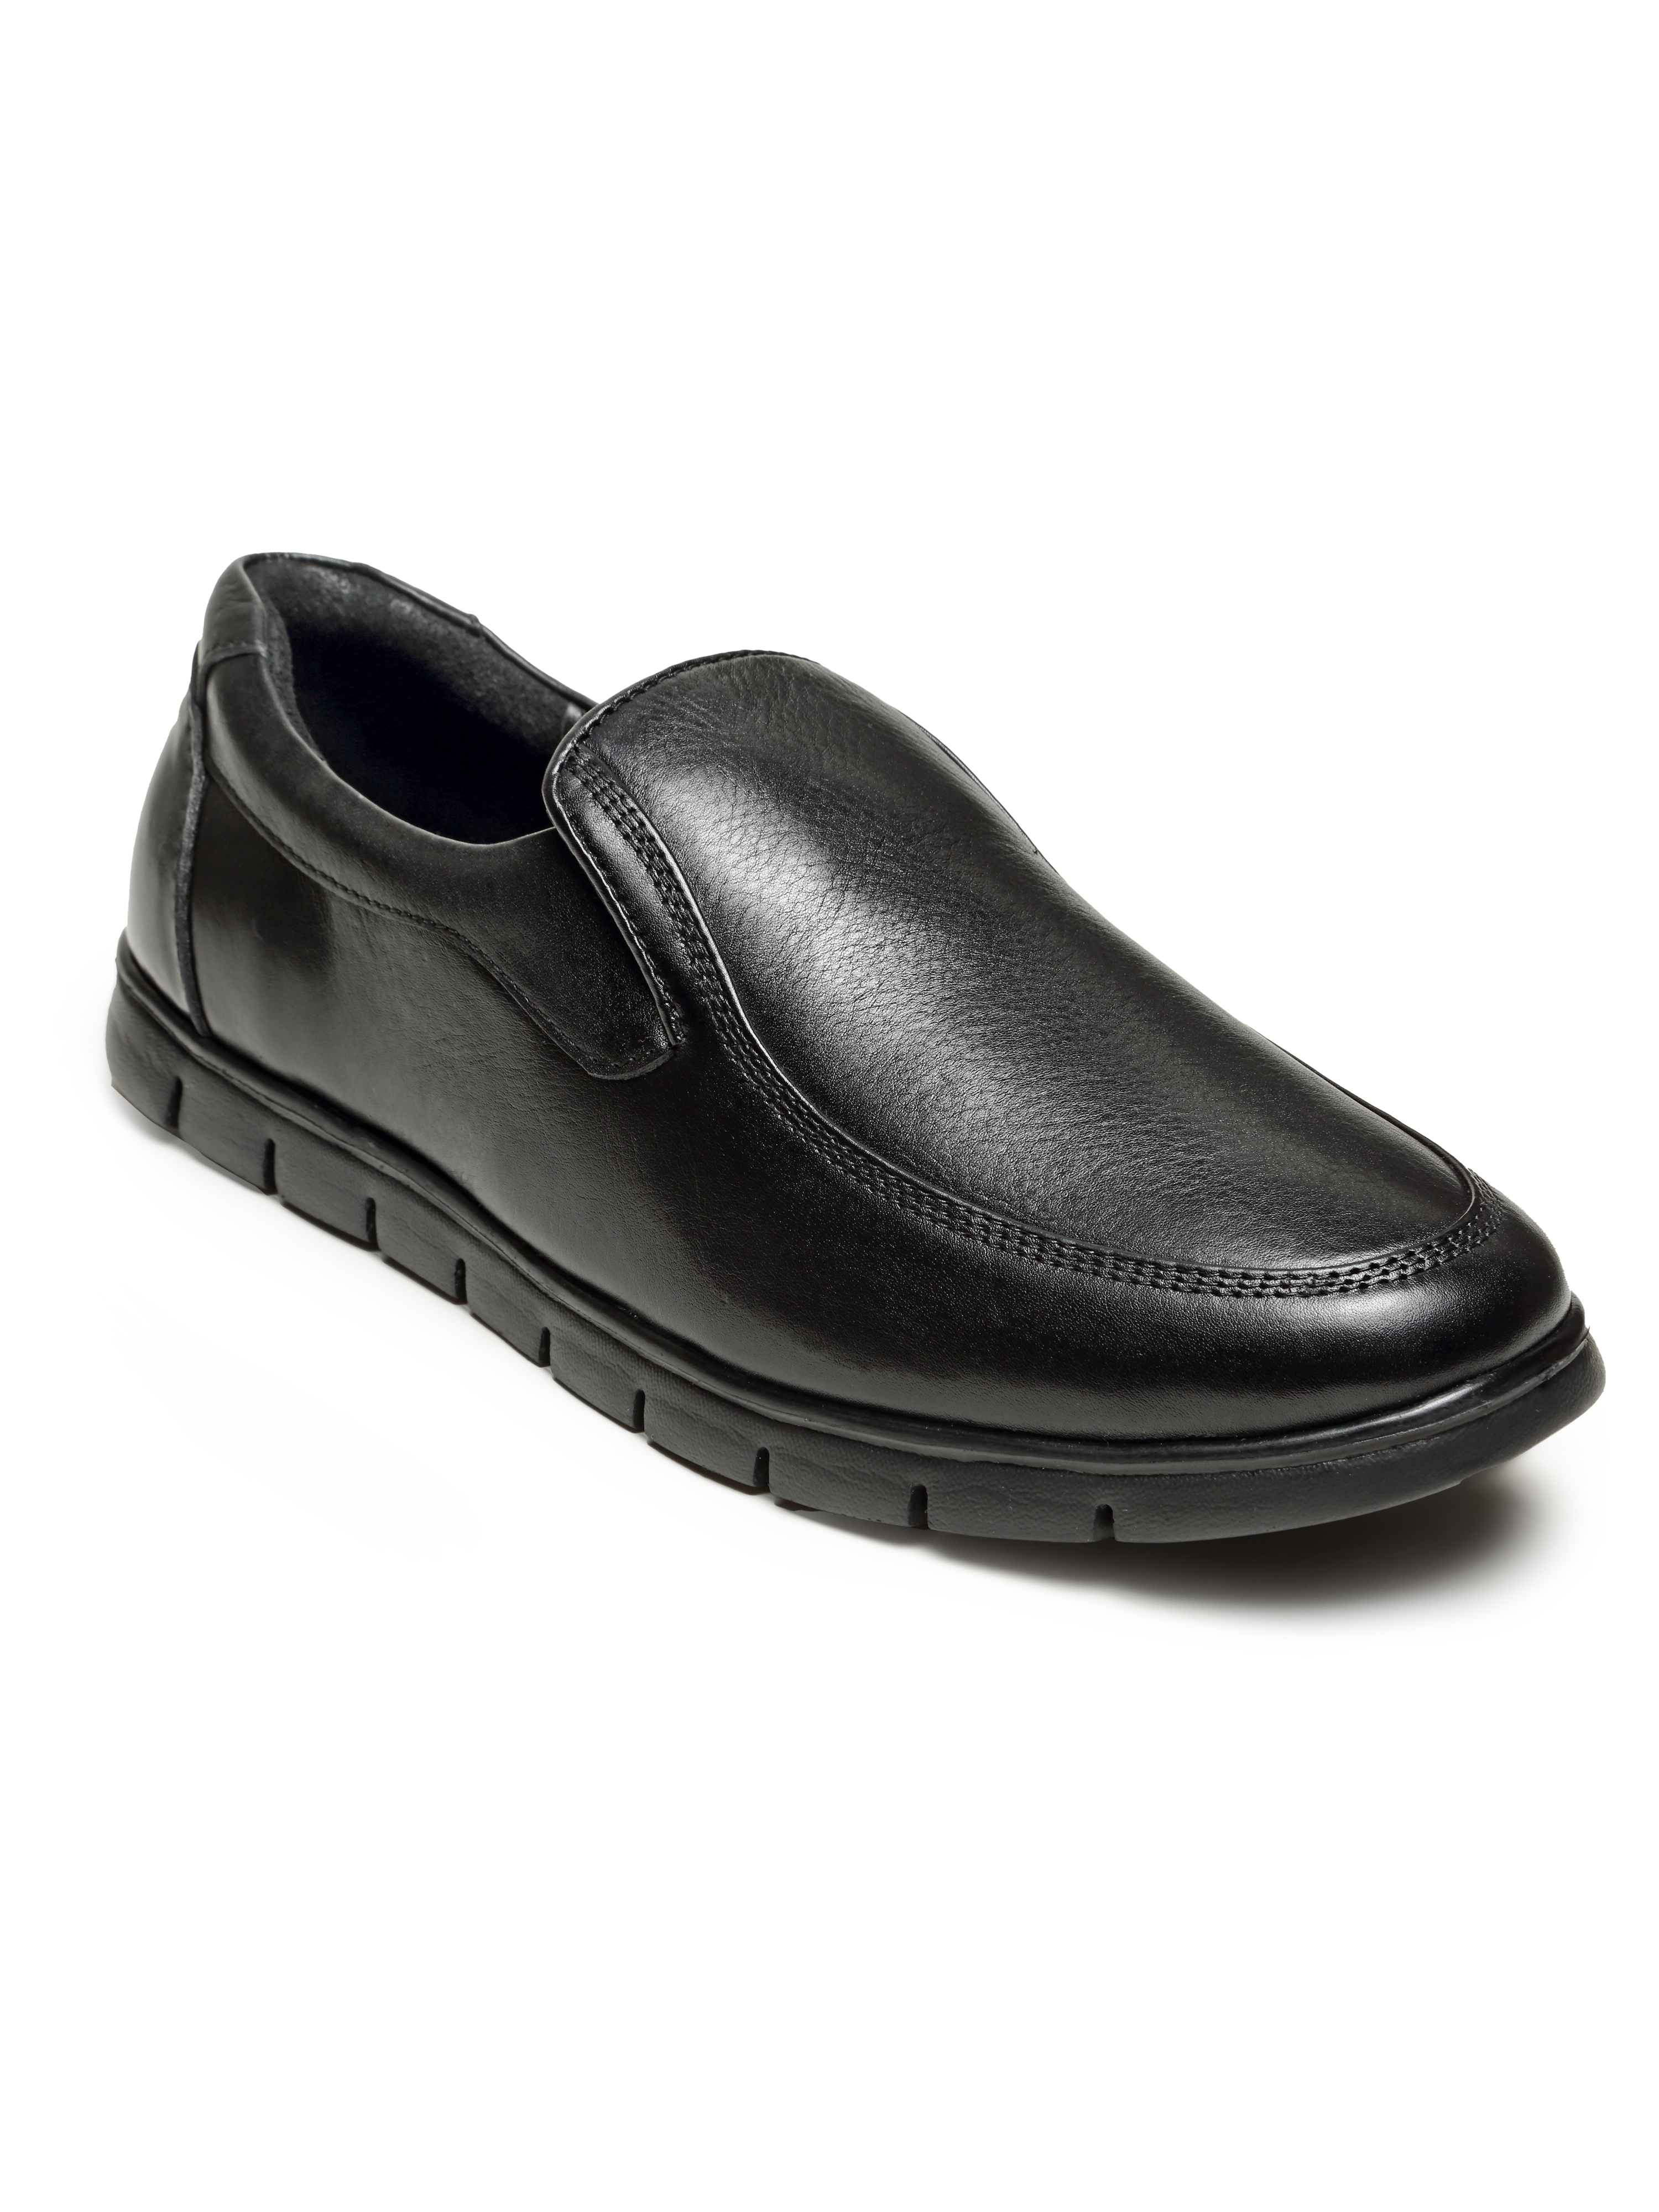 Buy Von Wellx Nikolay Black Shoes(specially For Diabetic Foot) Online in Chennai